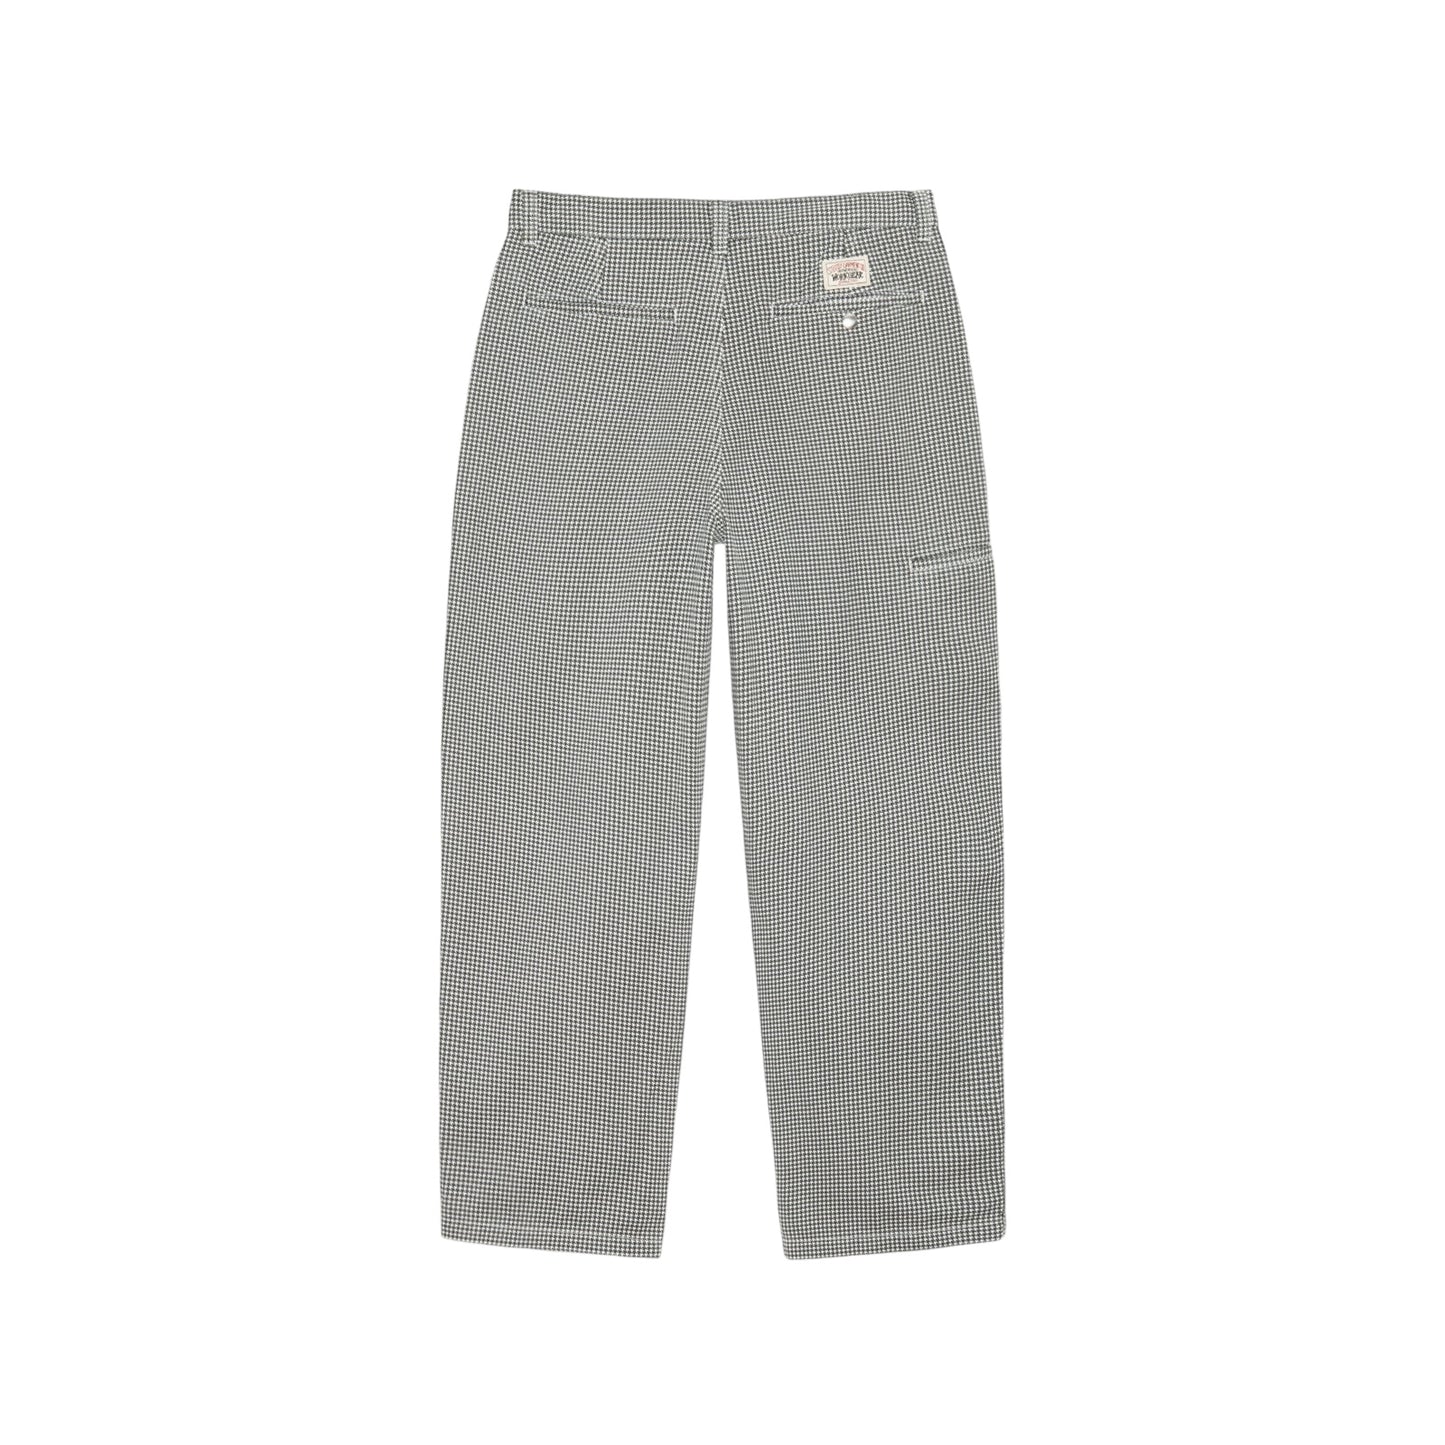 Stussy Workgear Trouser Twill- Houndstooth